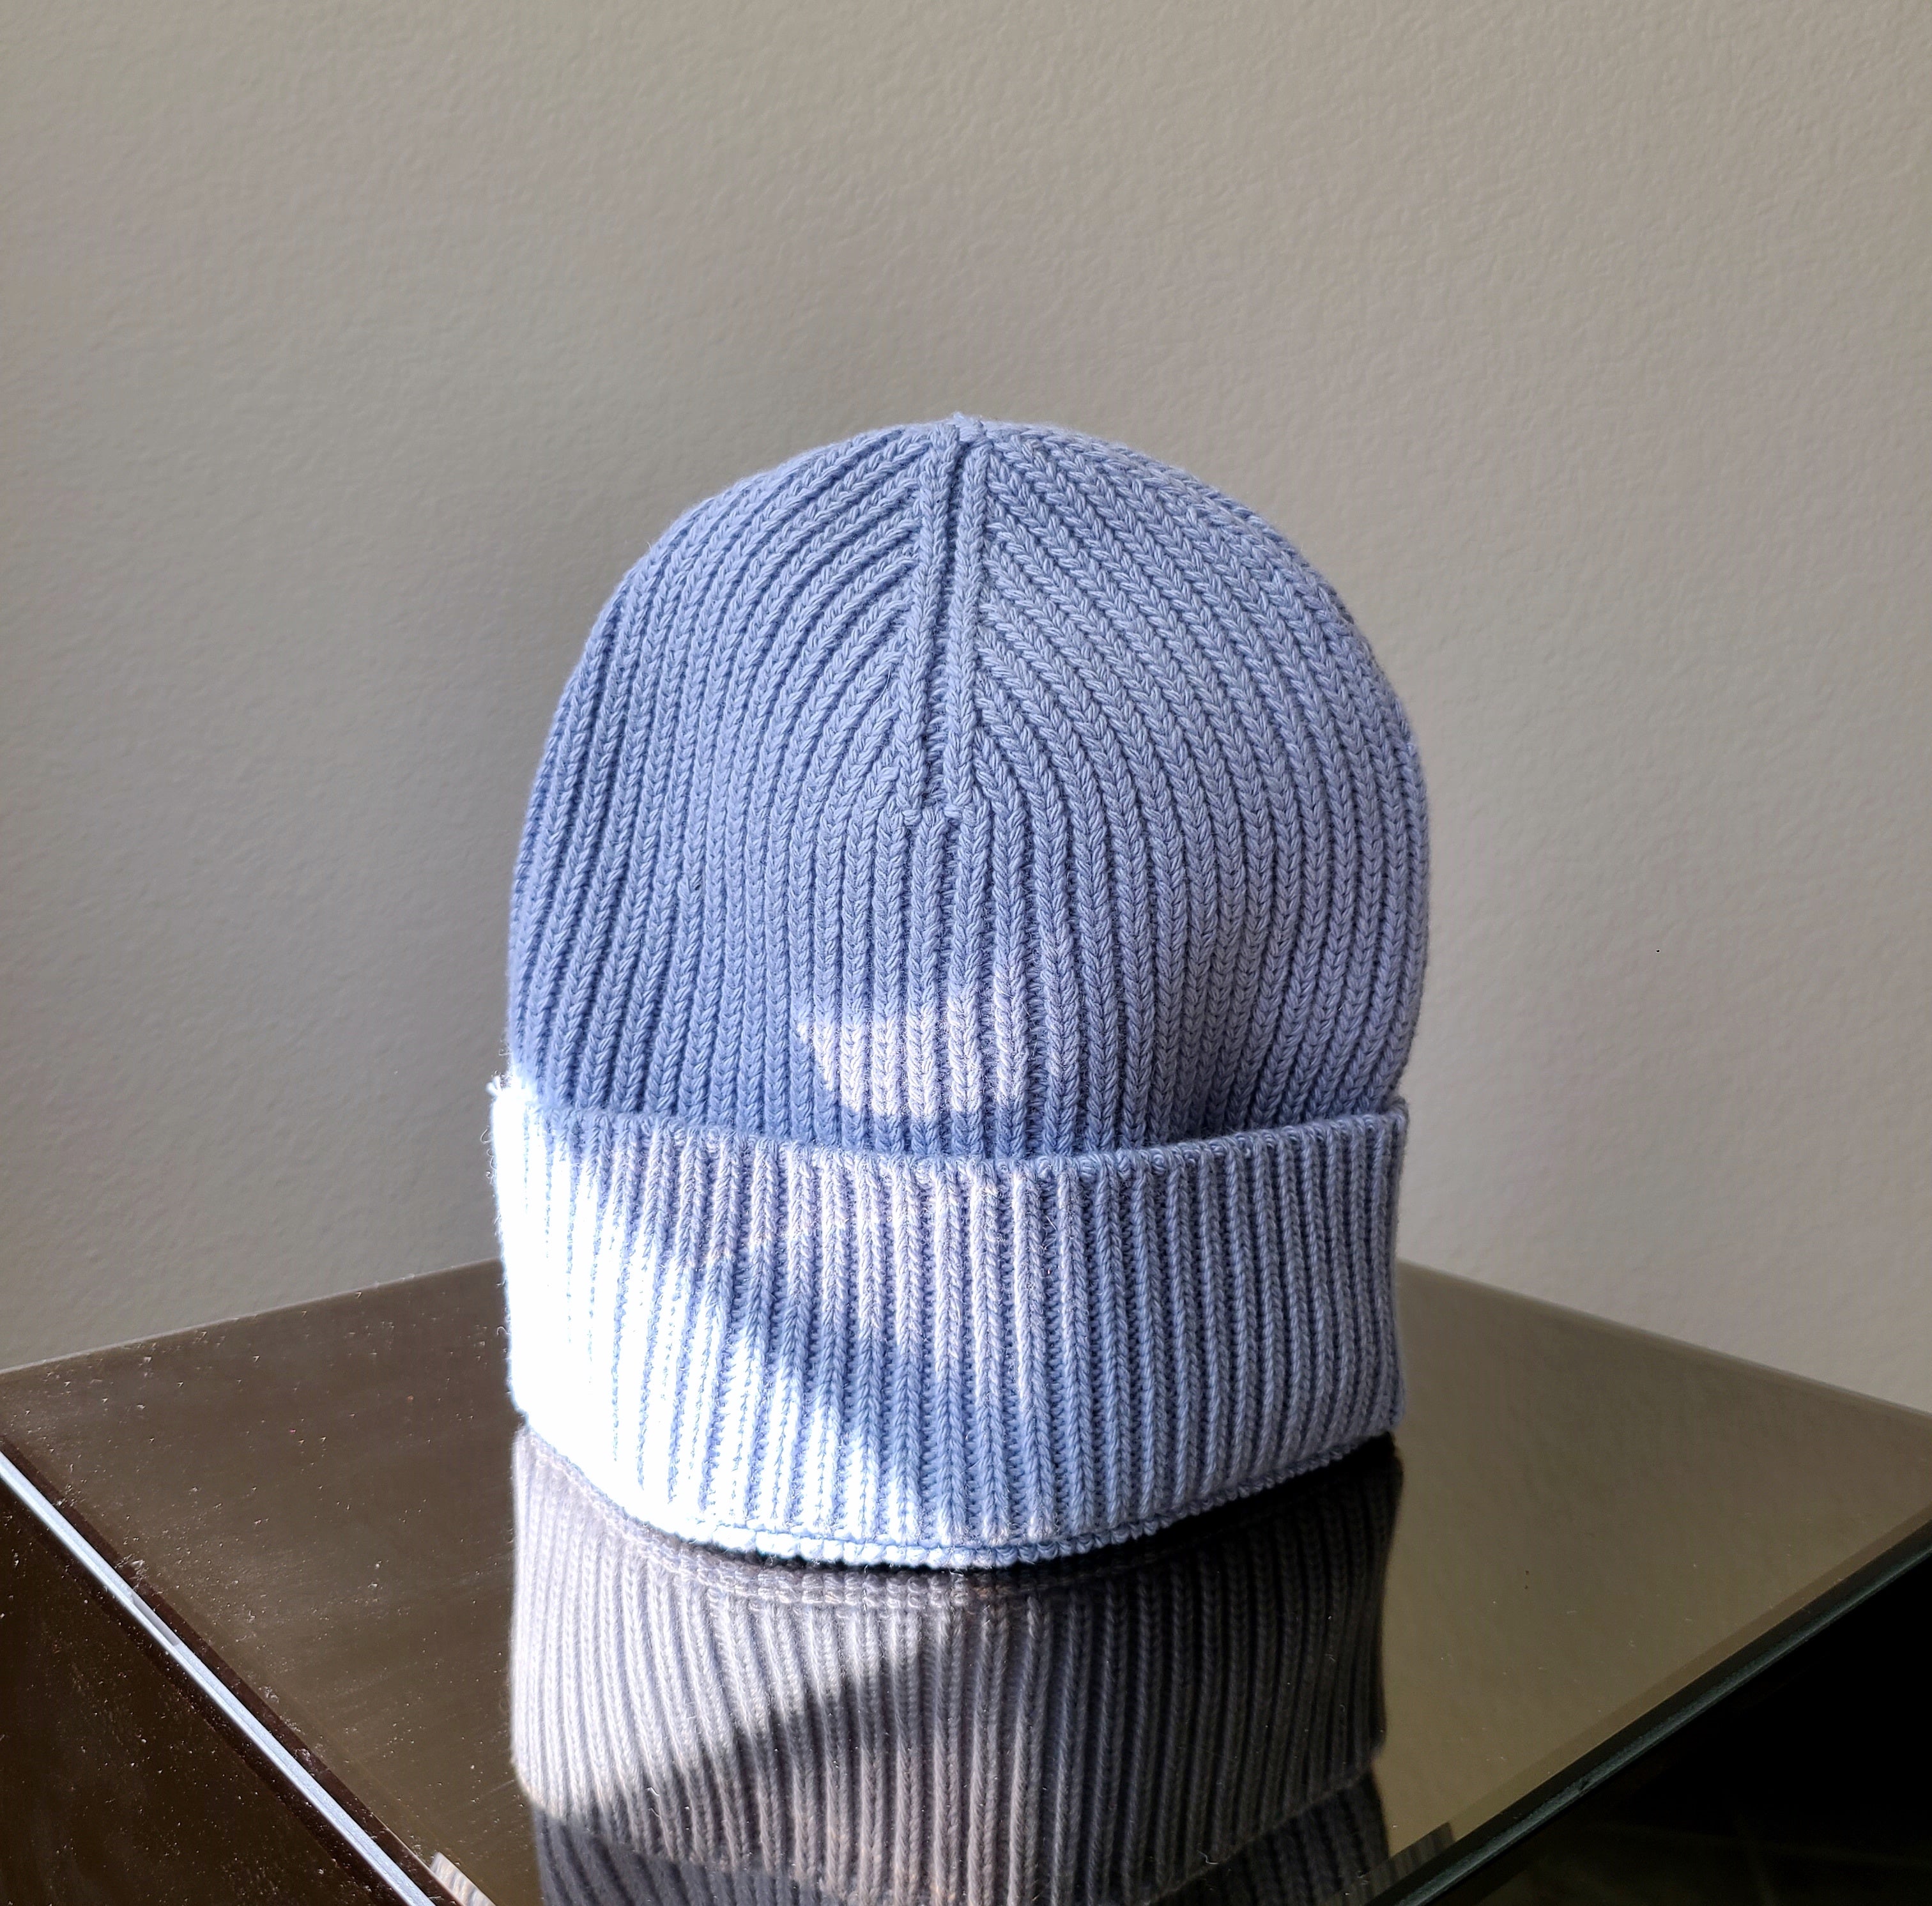 Italy made classic Knit beanie hat